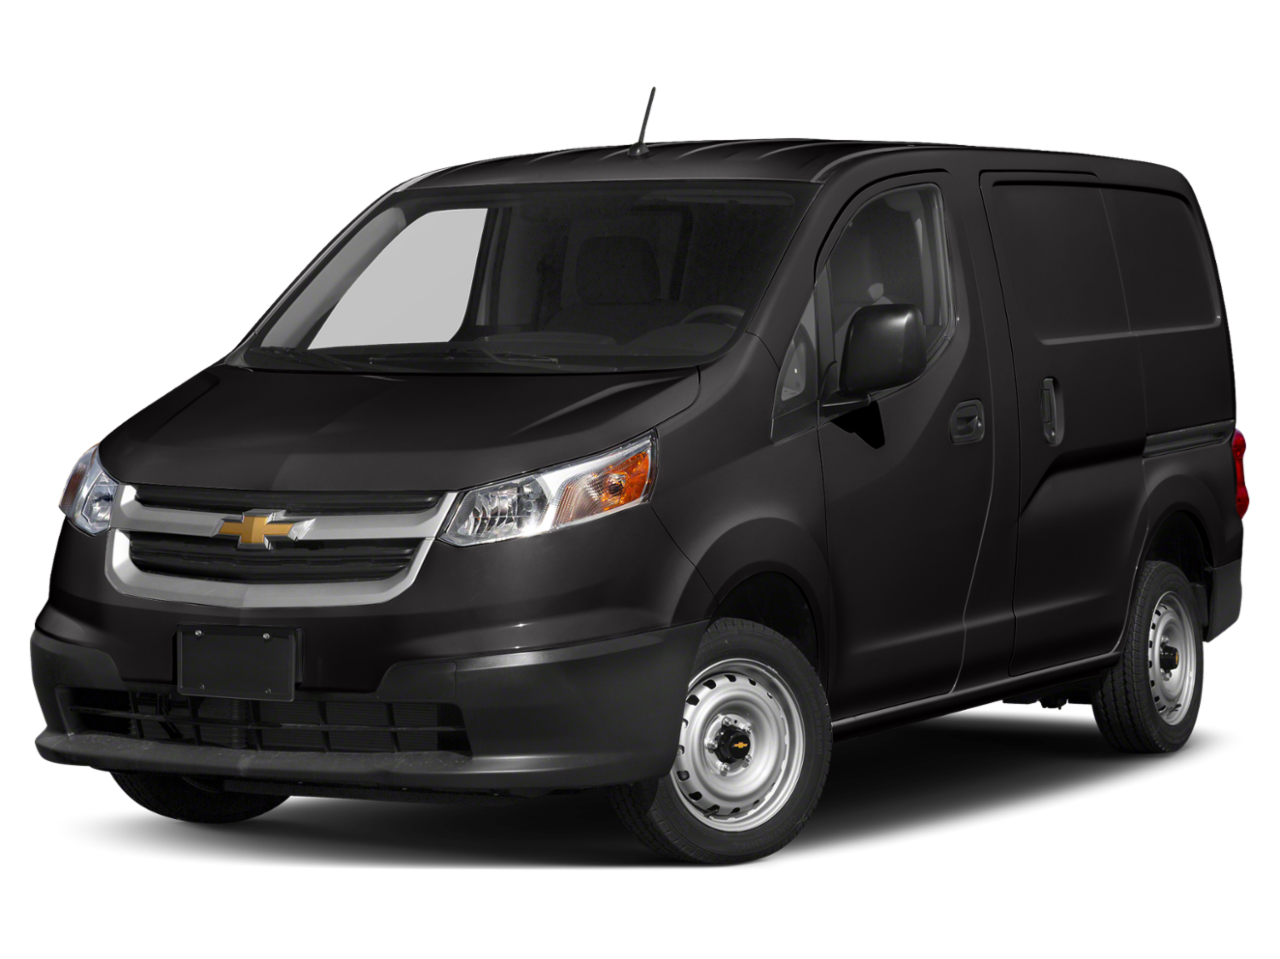 Chevrolet City Express Repair: Service and Maintenance Cost